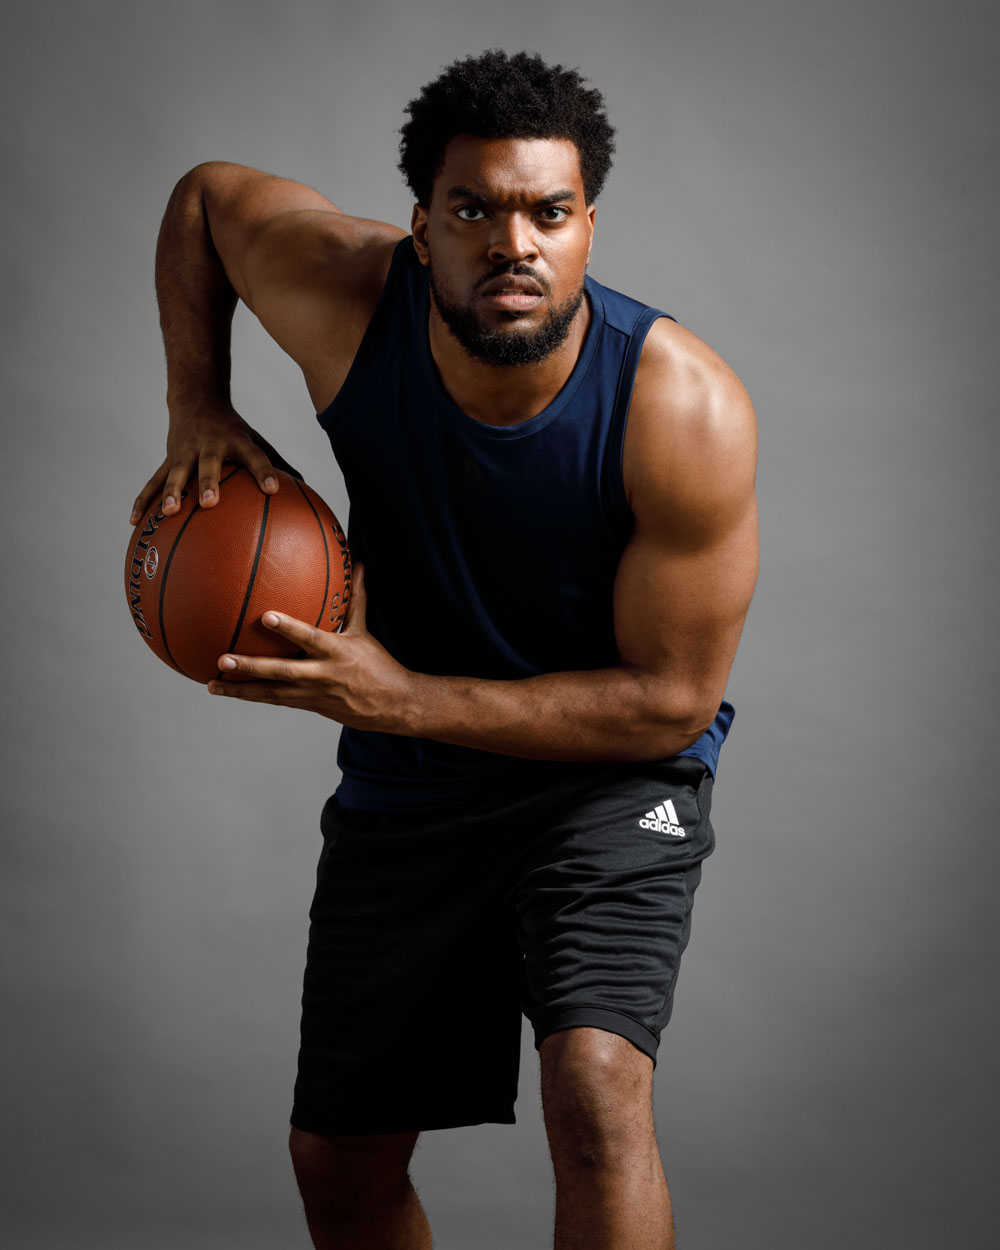 Big and tall model Mark W. as a basketball player, showcasing his fitness and agility, crucial for sports roles